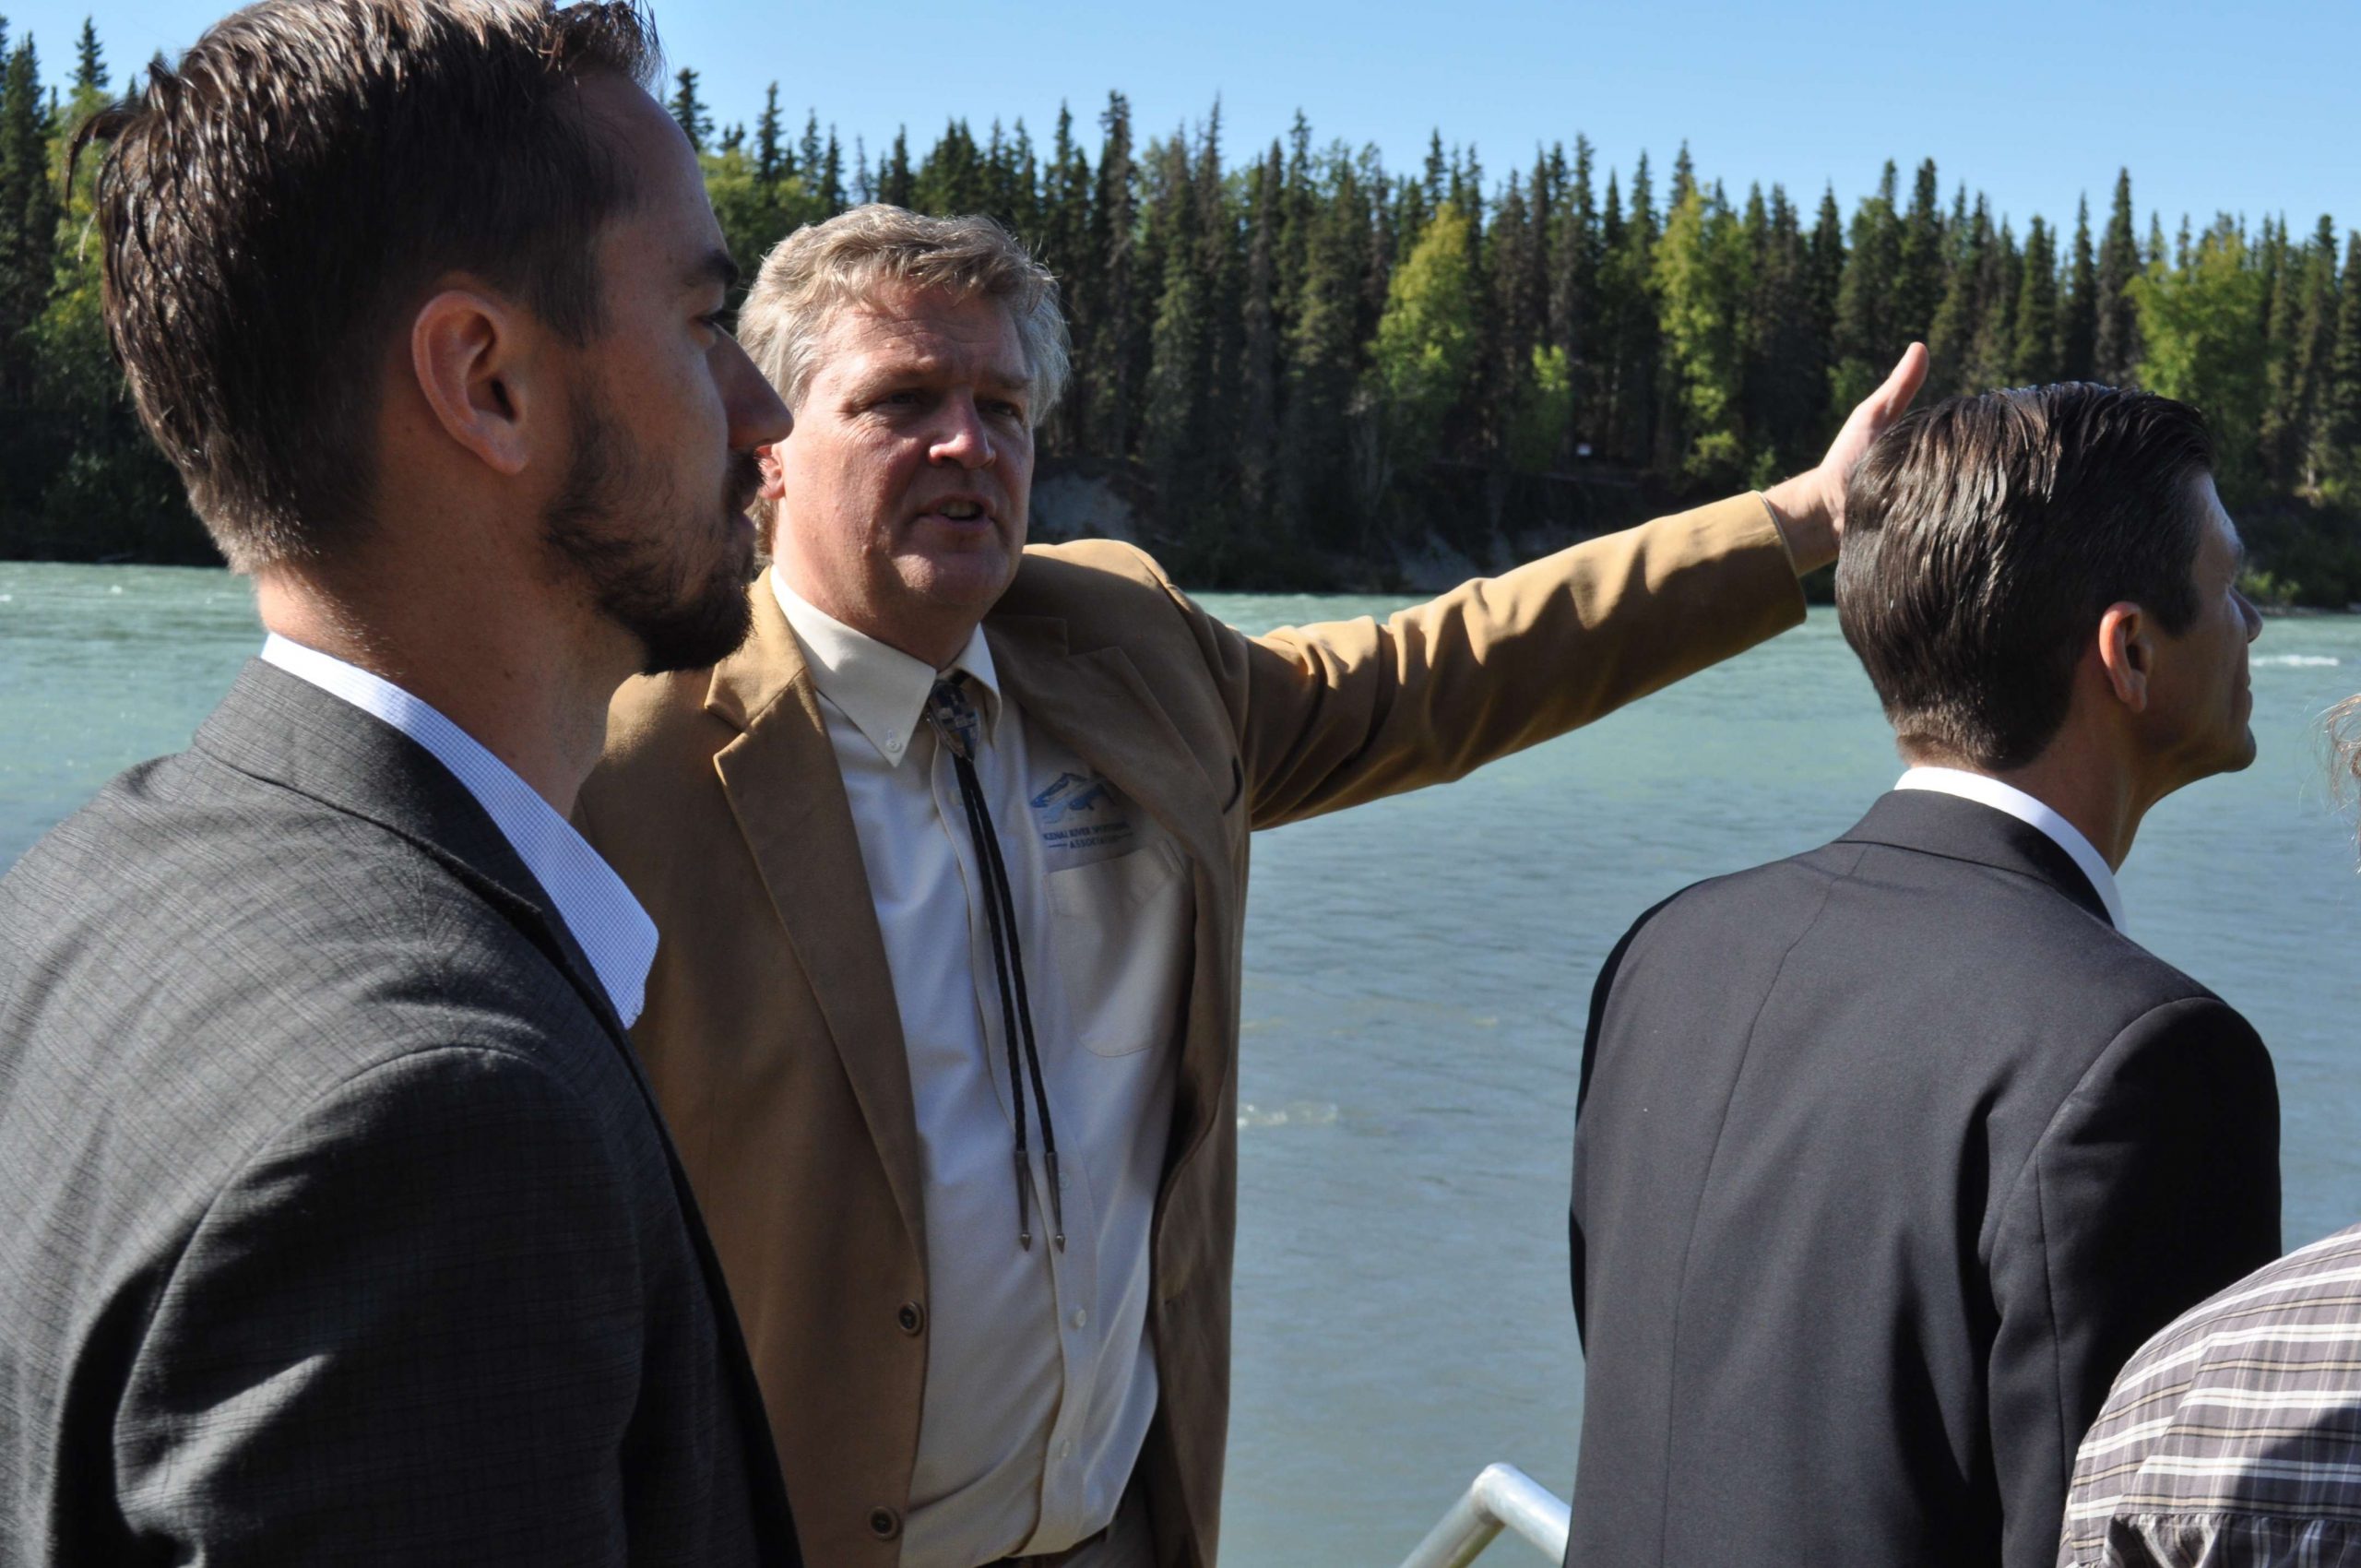 Ricky Gease (center), executive director of the Kenai River Sportfishing Association, shows off a conservation project along the Kenai River that was funded by the Kenai River Classic tournament.